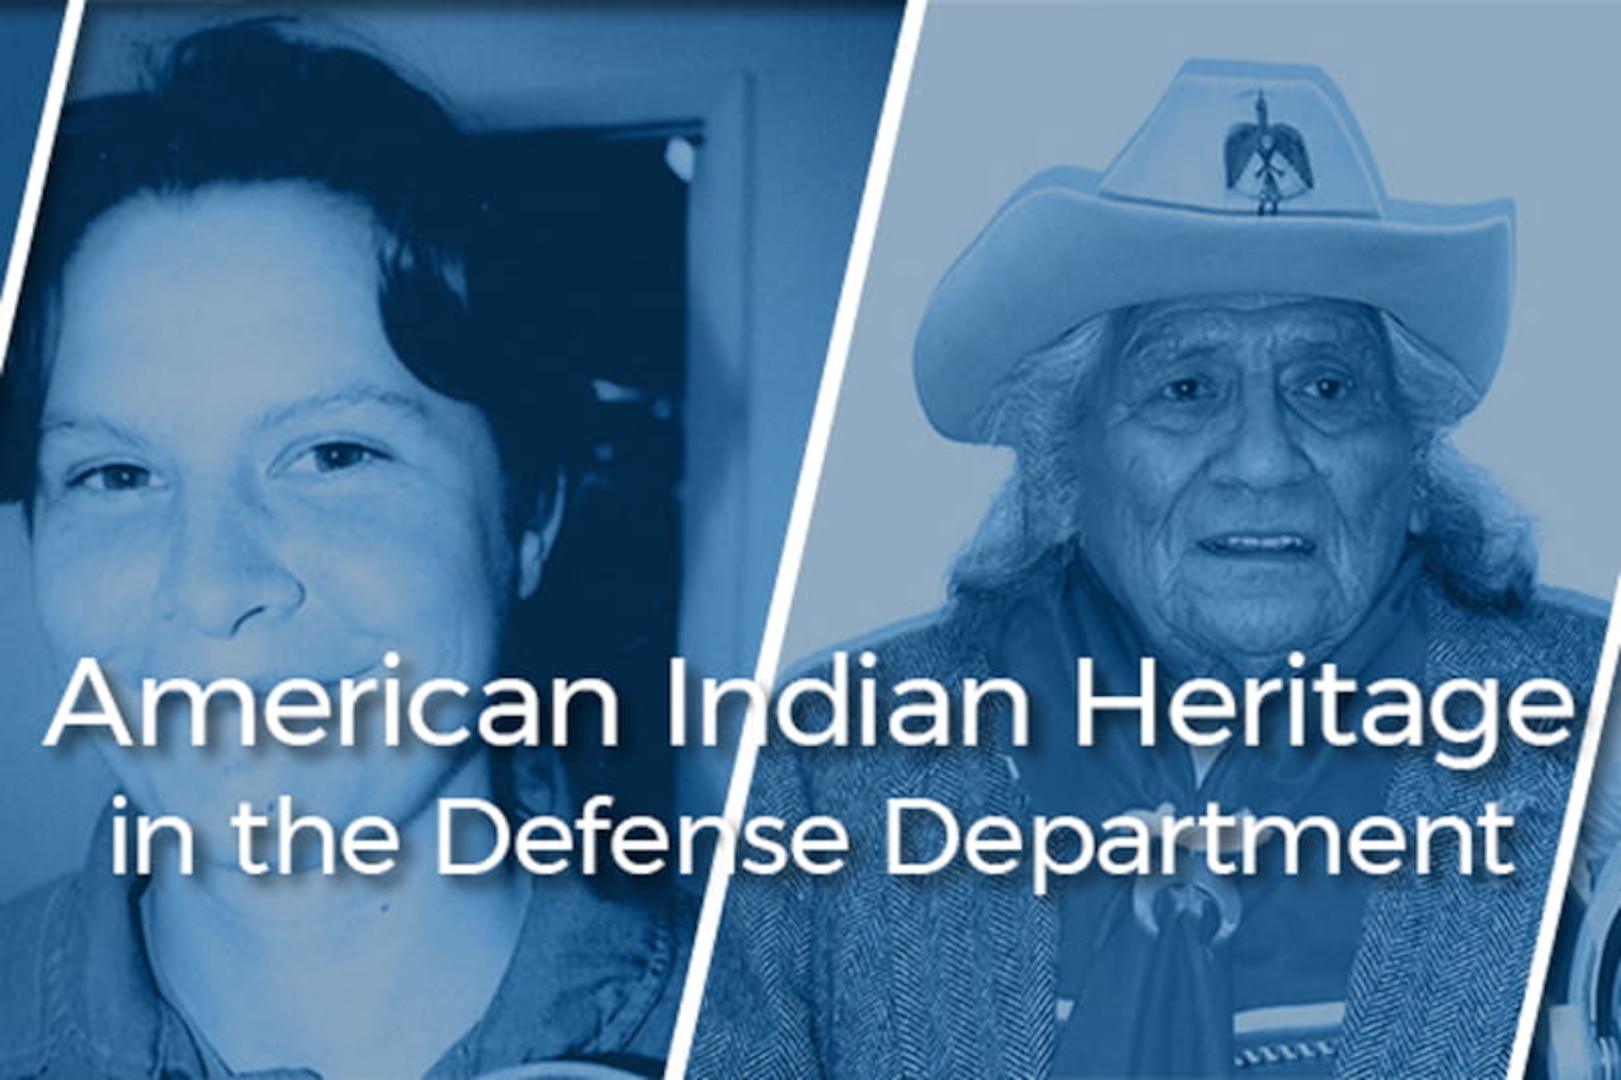 American Indian Heritage in the Defense Department